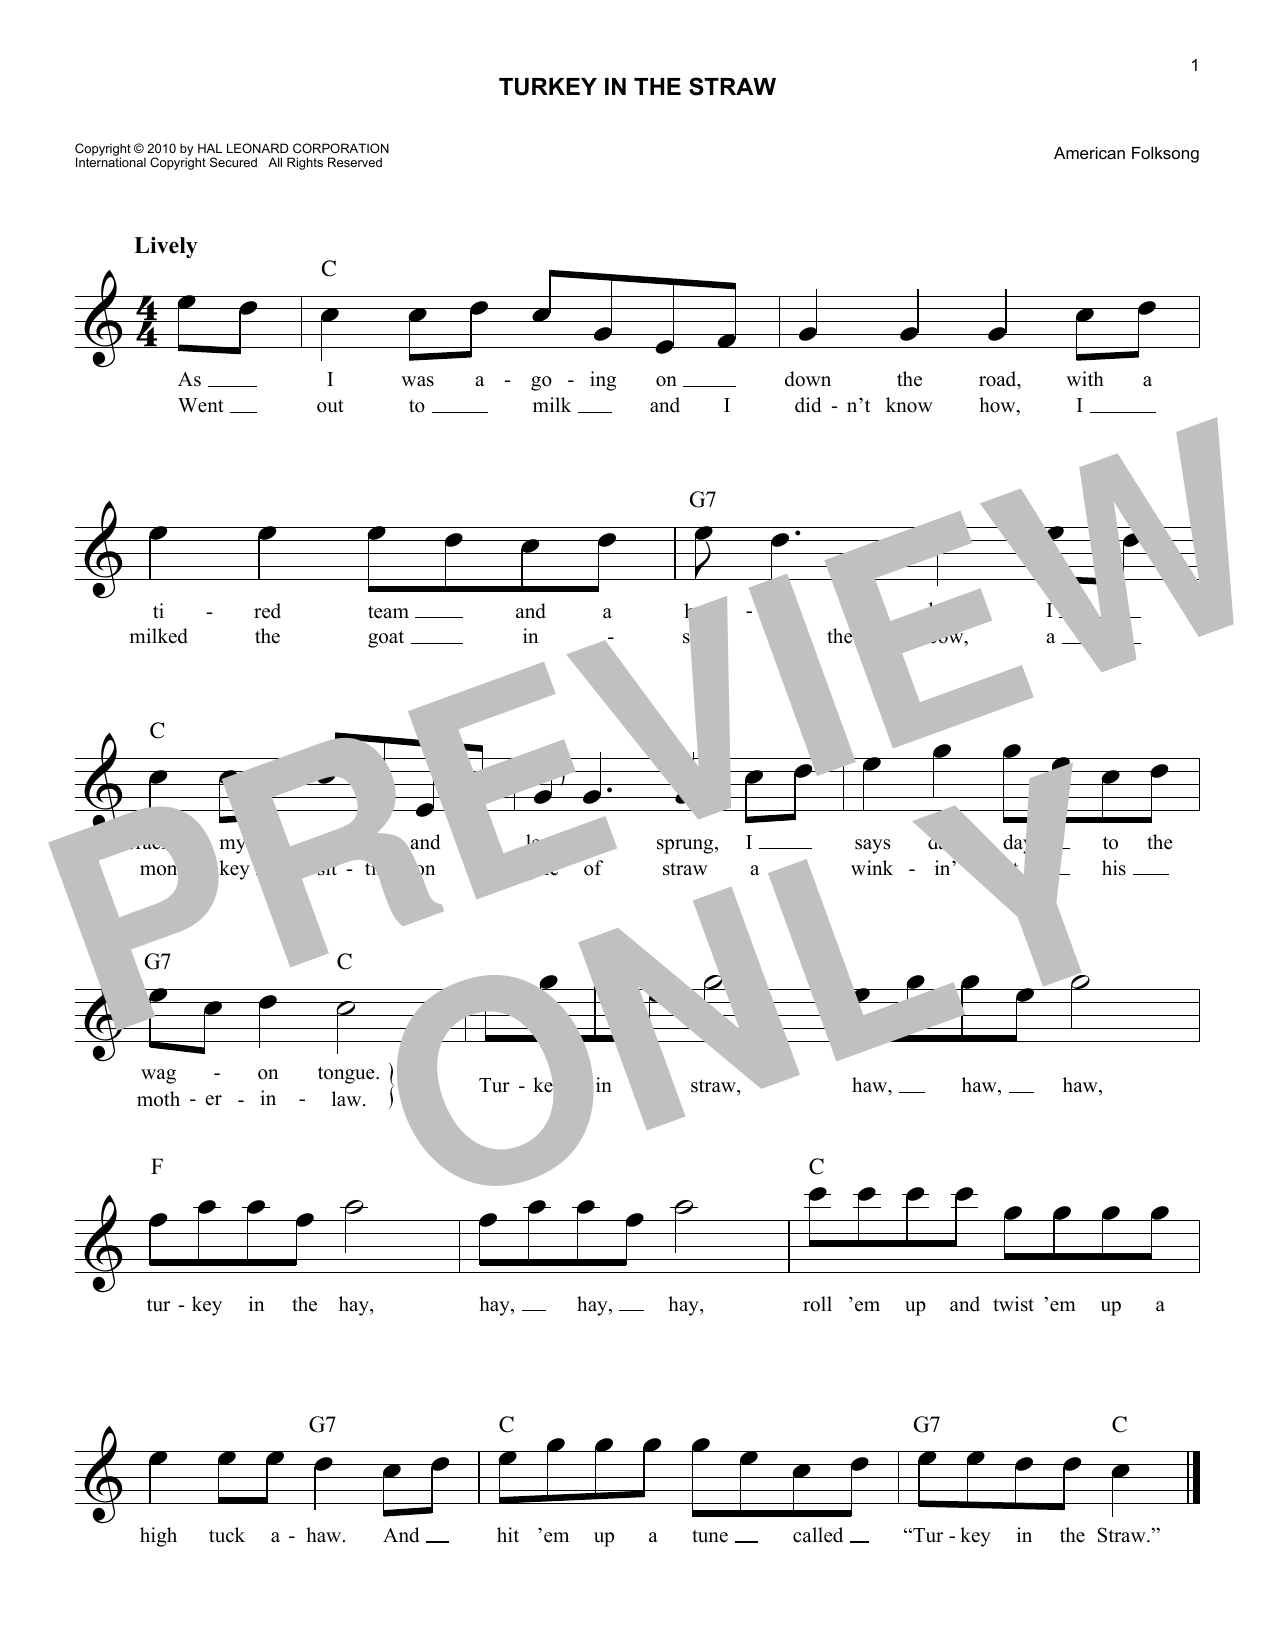 Download American Folksong Turkey In The Straw Sheet Music